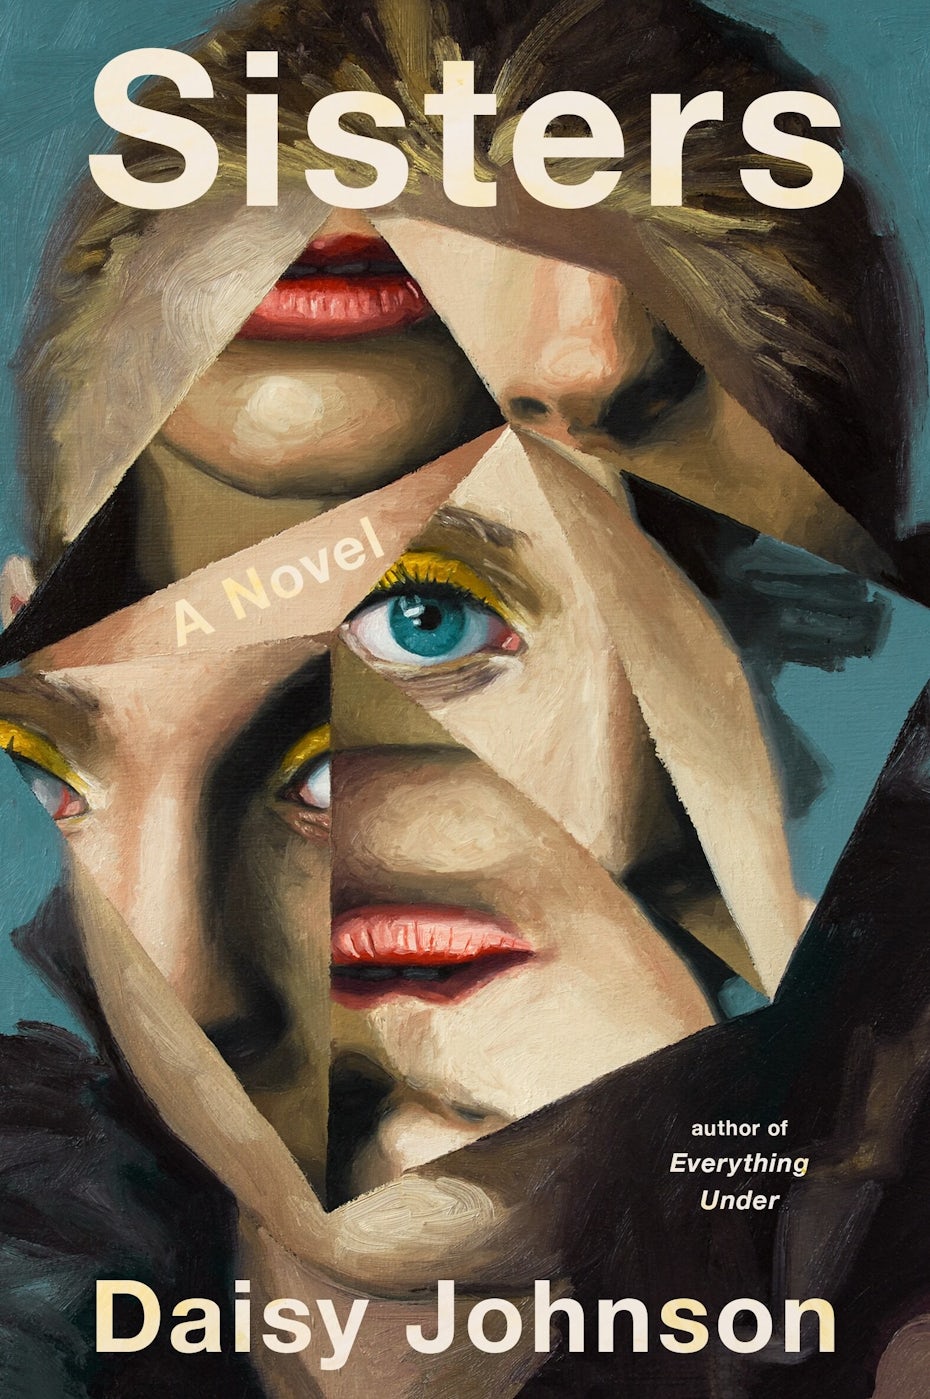 book cover showing a woman’s face in mirror shards